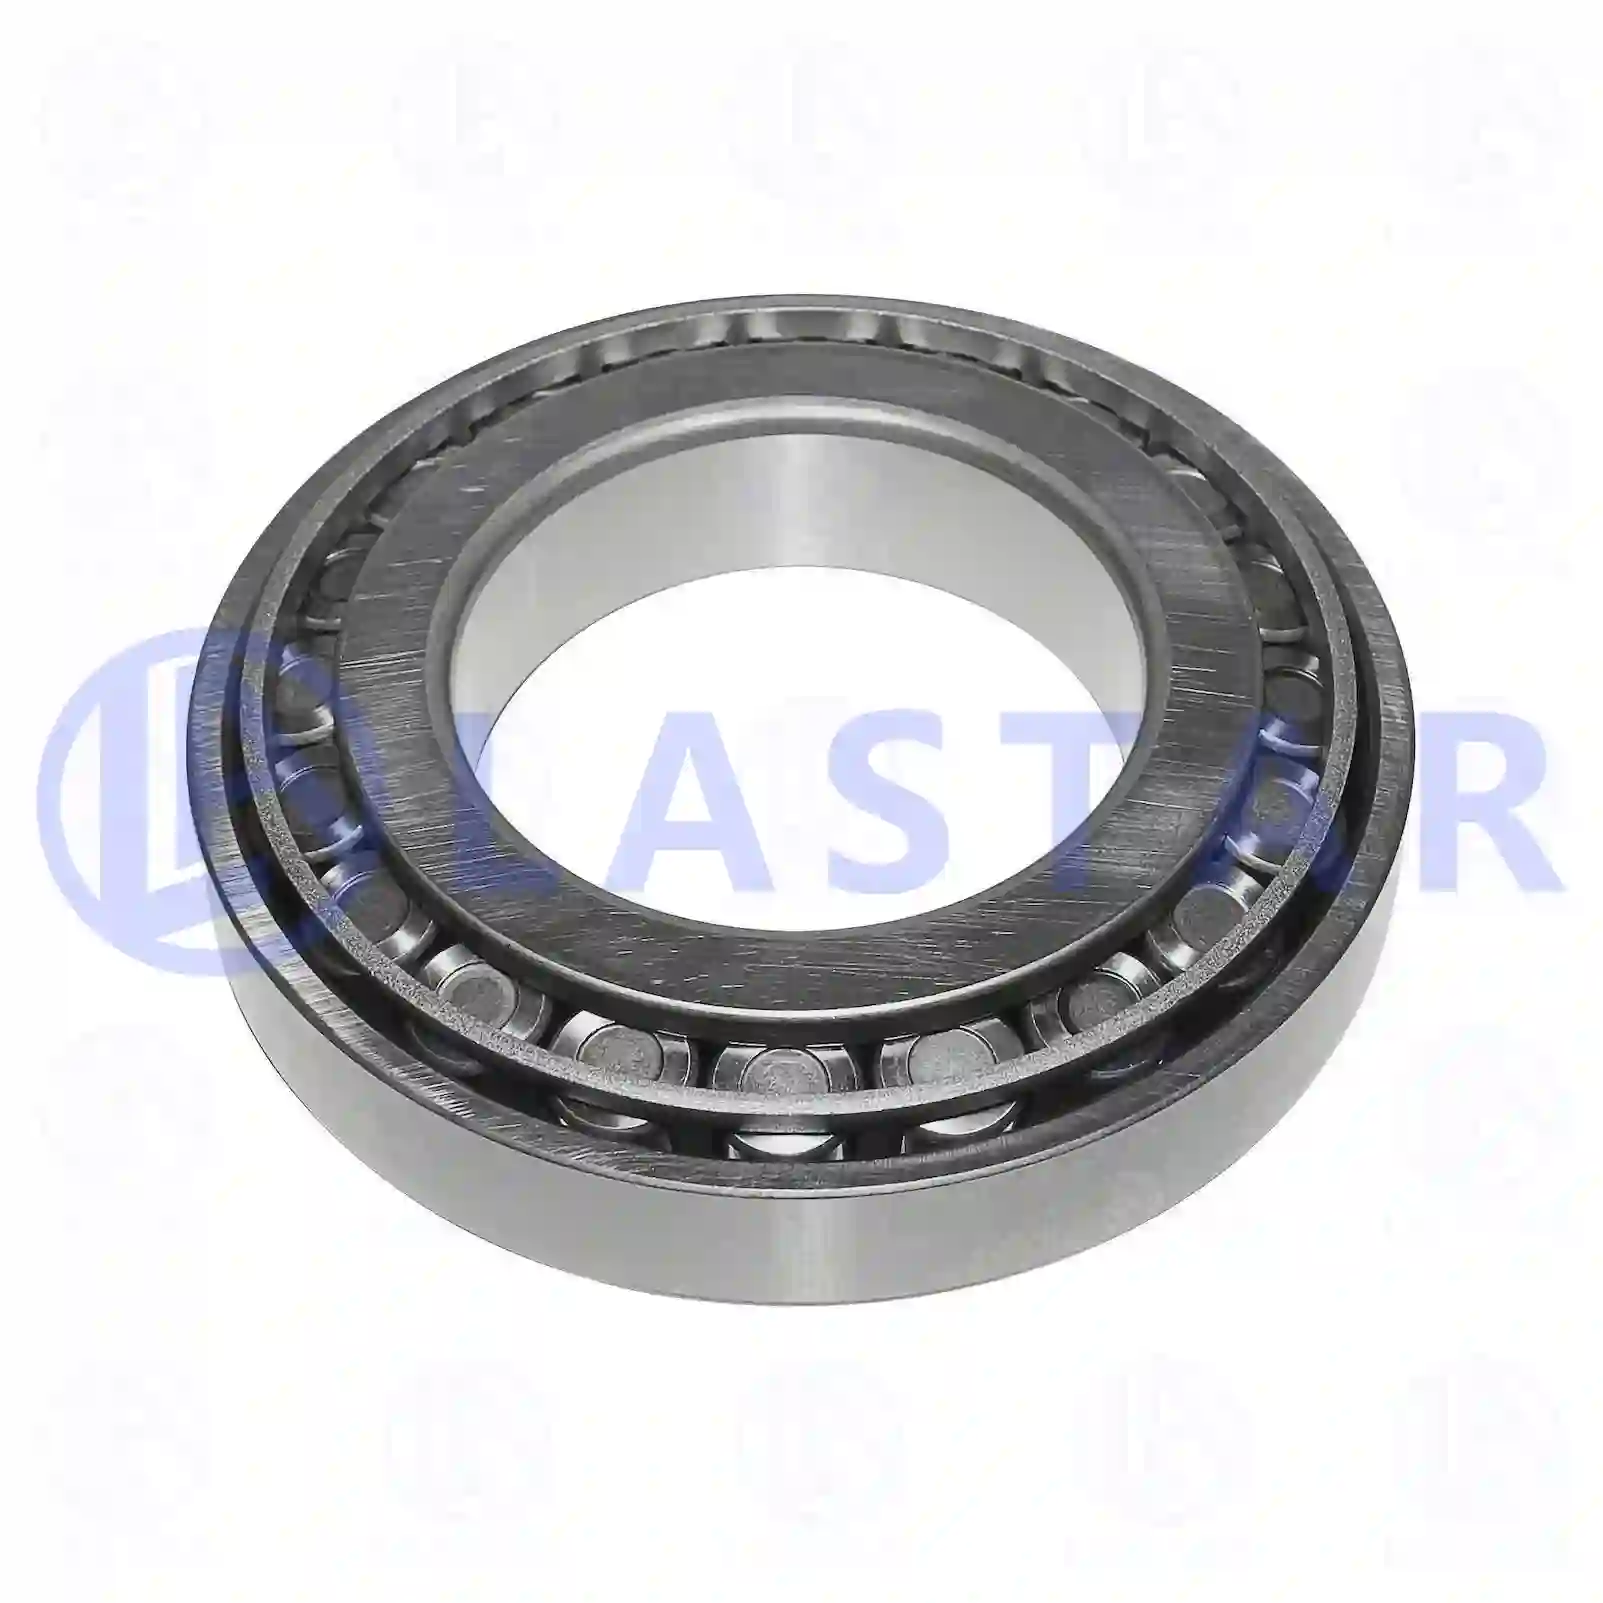 Tapered roller bearing, 77725209, 06324805000, 06324850095, 06324890032, 06324890050, 06324890095, 64934200023, 64934200024, 64934200065, 81934200090, A0023431220, 0007200302, 000720030220, 0049812105, 0049814905, 0079810005, 0023430220, 0023431220, 0959130220 ||  77725209 Lastar Spare Part | Truck Spare Parts, Auotomotive Spare Parts Tapered roller bearing, 77725209, 06324805000, 06324850095, 06324890032, 06324890050, 06324890095, 64934200023, 64934200024, 64934200065, 81934200090, A0023431220, 0007200302, 000720030220, 0049812105, 0049814905, 0079810005, 0023430220, 0023431220, 0959130220 ||  77725209 Lastar Spare Part | Truck Spare Parts, Auotomotive Spare Parts